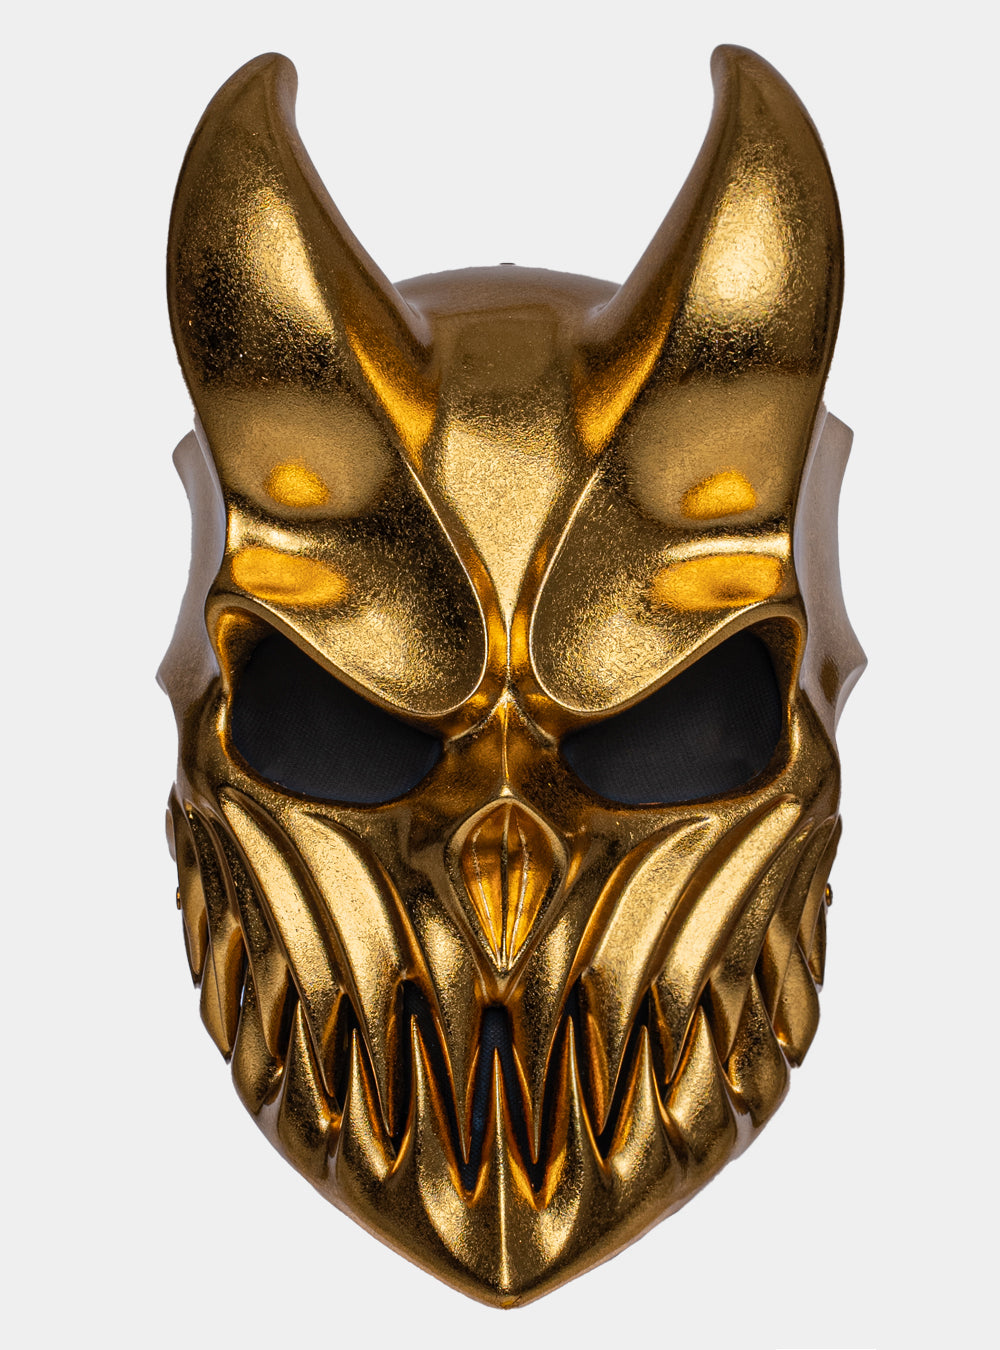 MASK “KID OF DARKNESS” by ALEX TERRIBLE TO PREVAIL) - buy KOD mask store – alexterrible